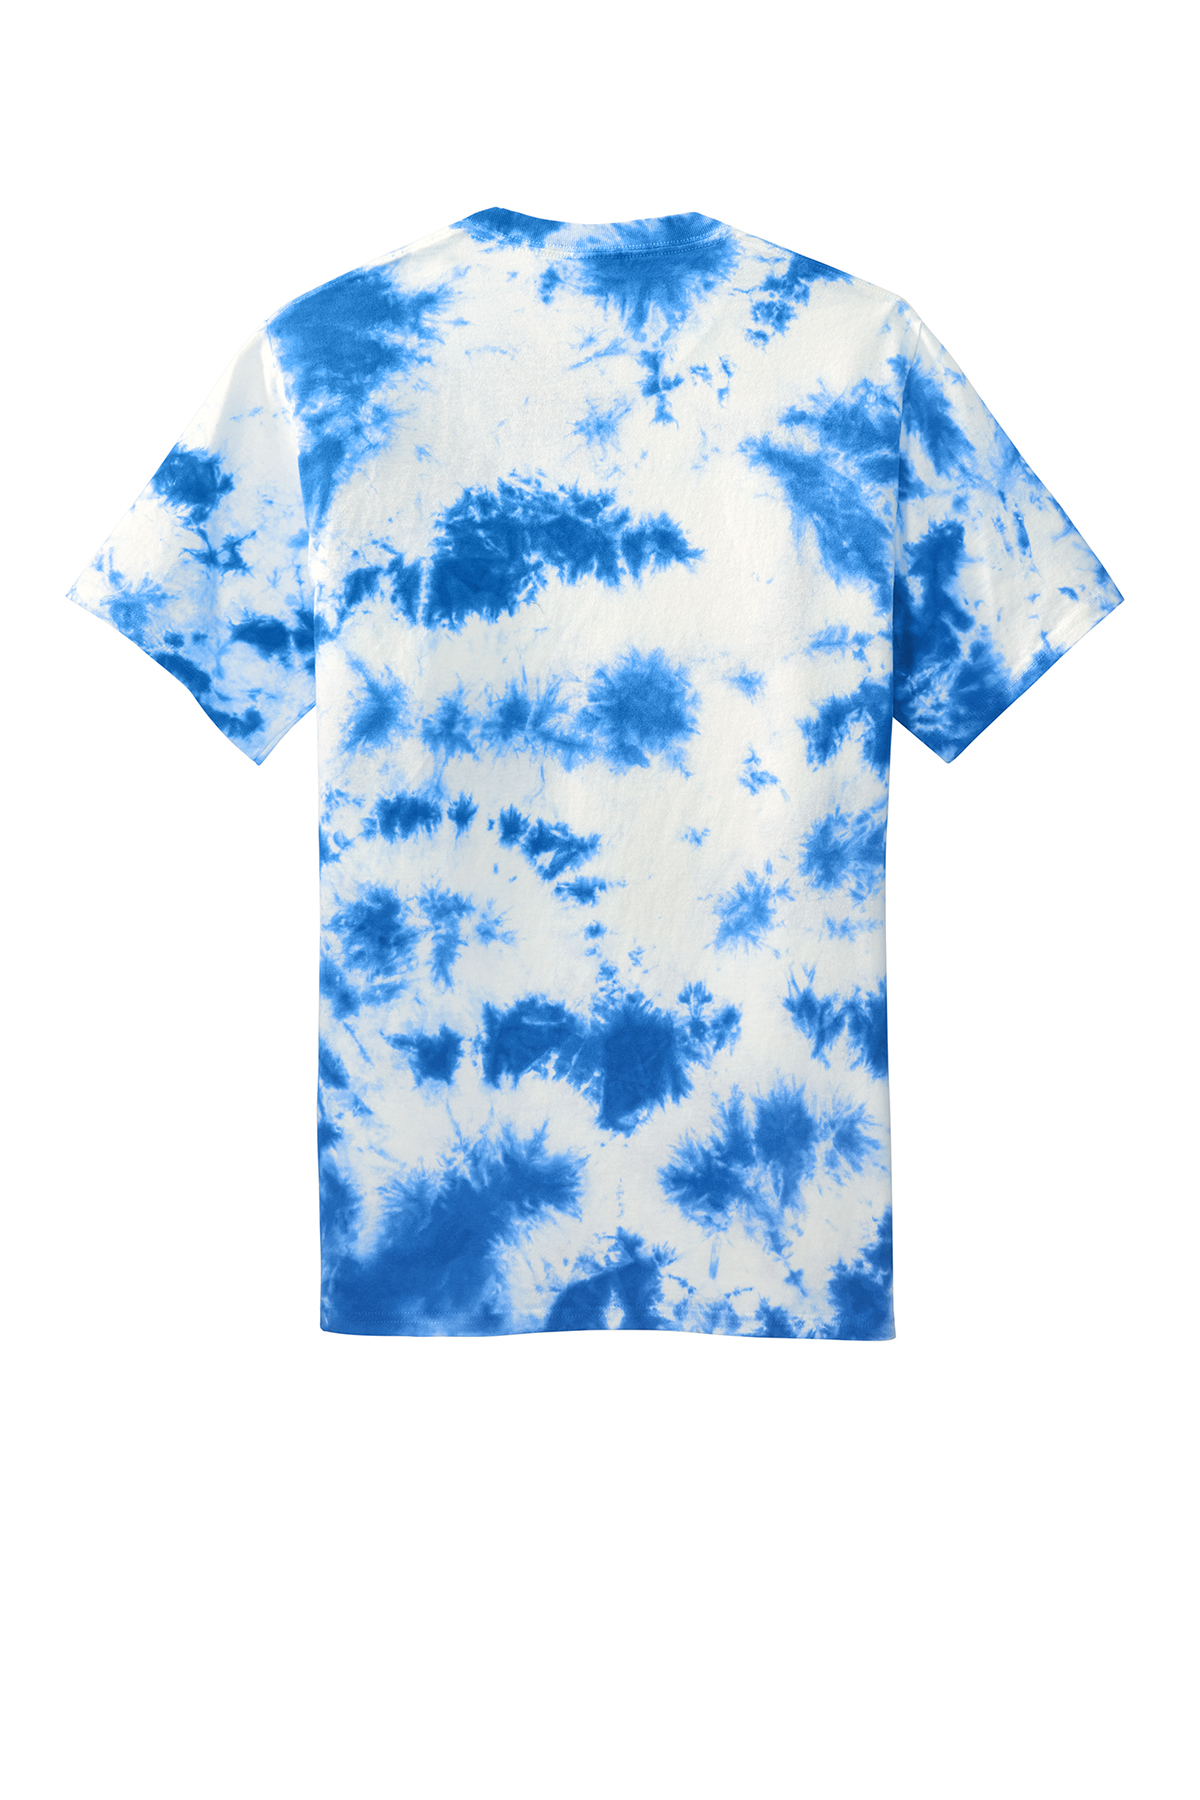 Port & Company Crystal Tie-Dye Tee | Product | Company Casuals